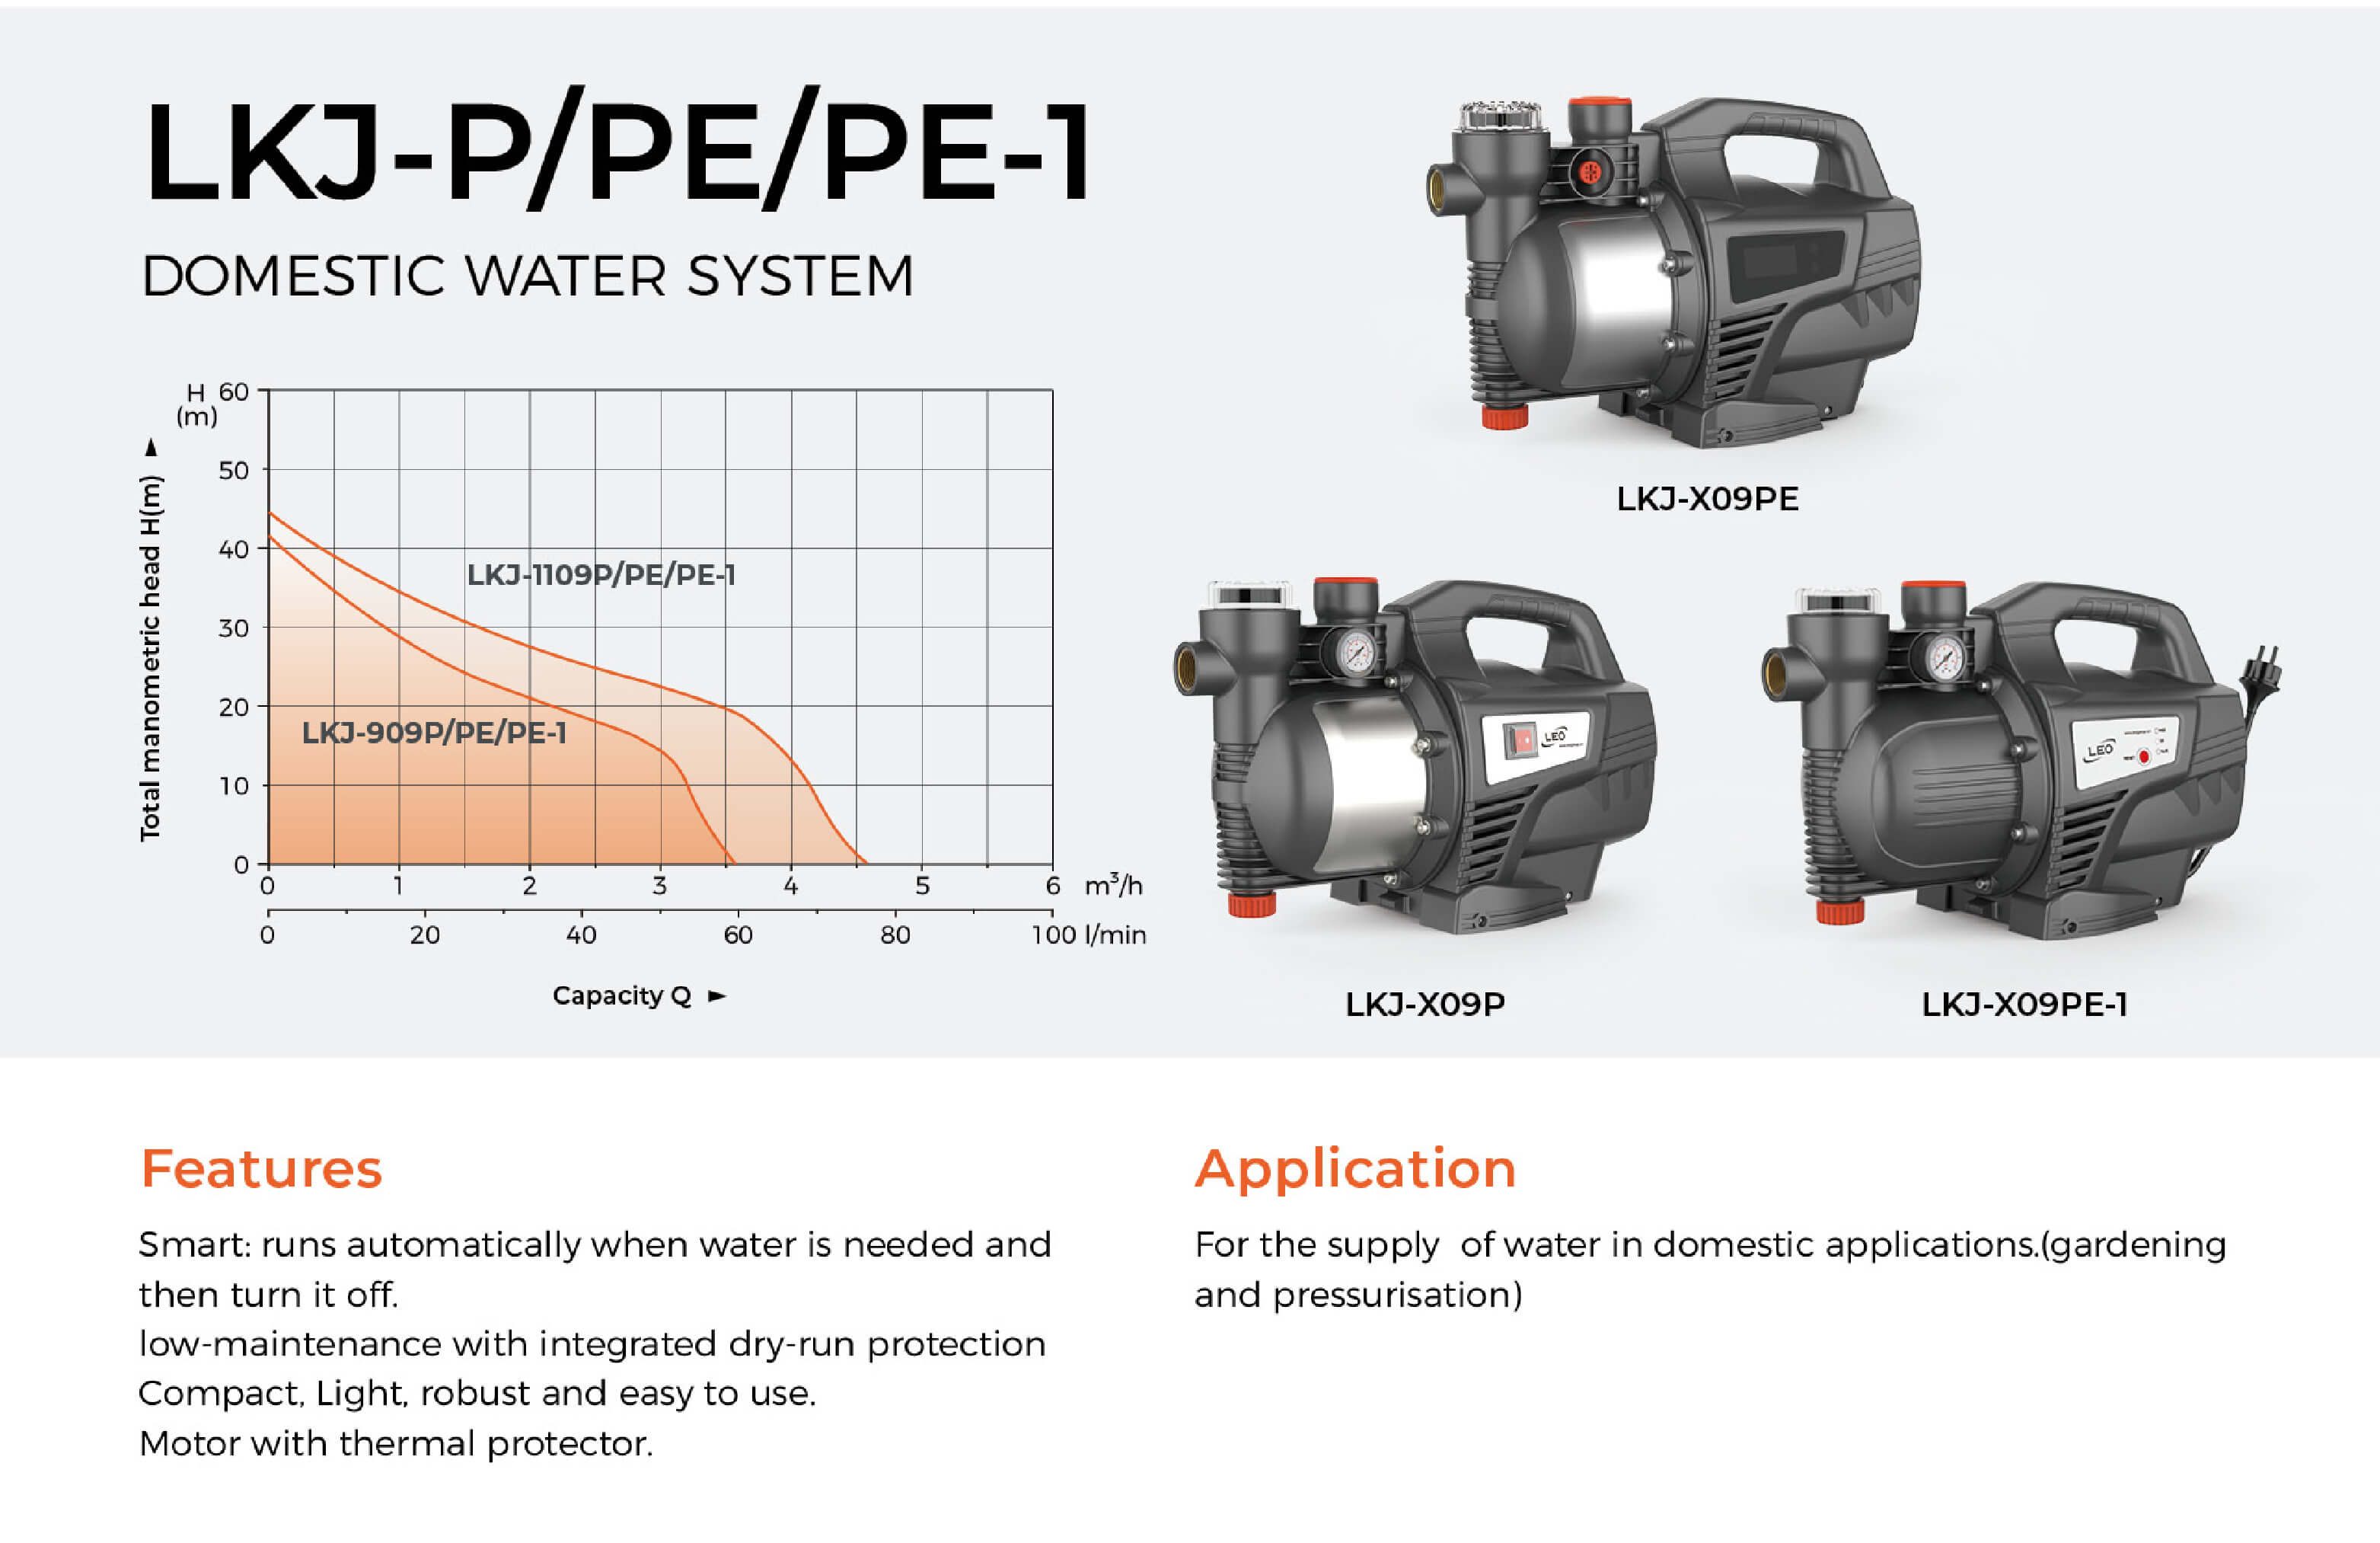 LKJ-P Domestic Water System Features